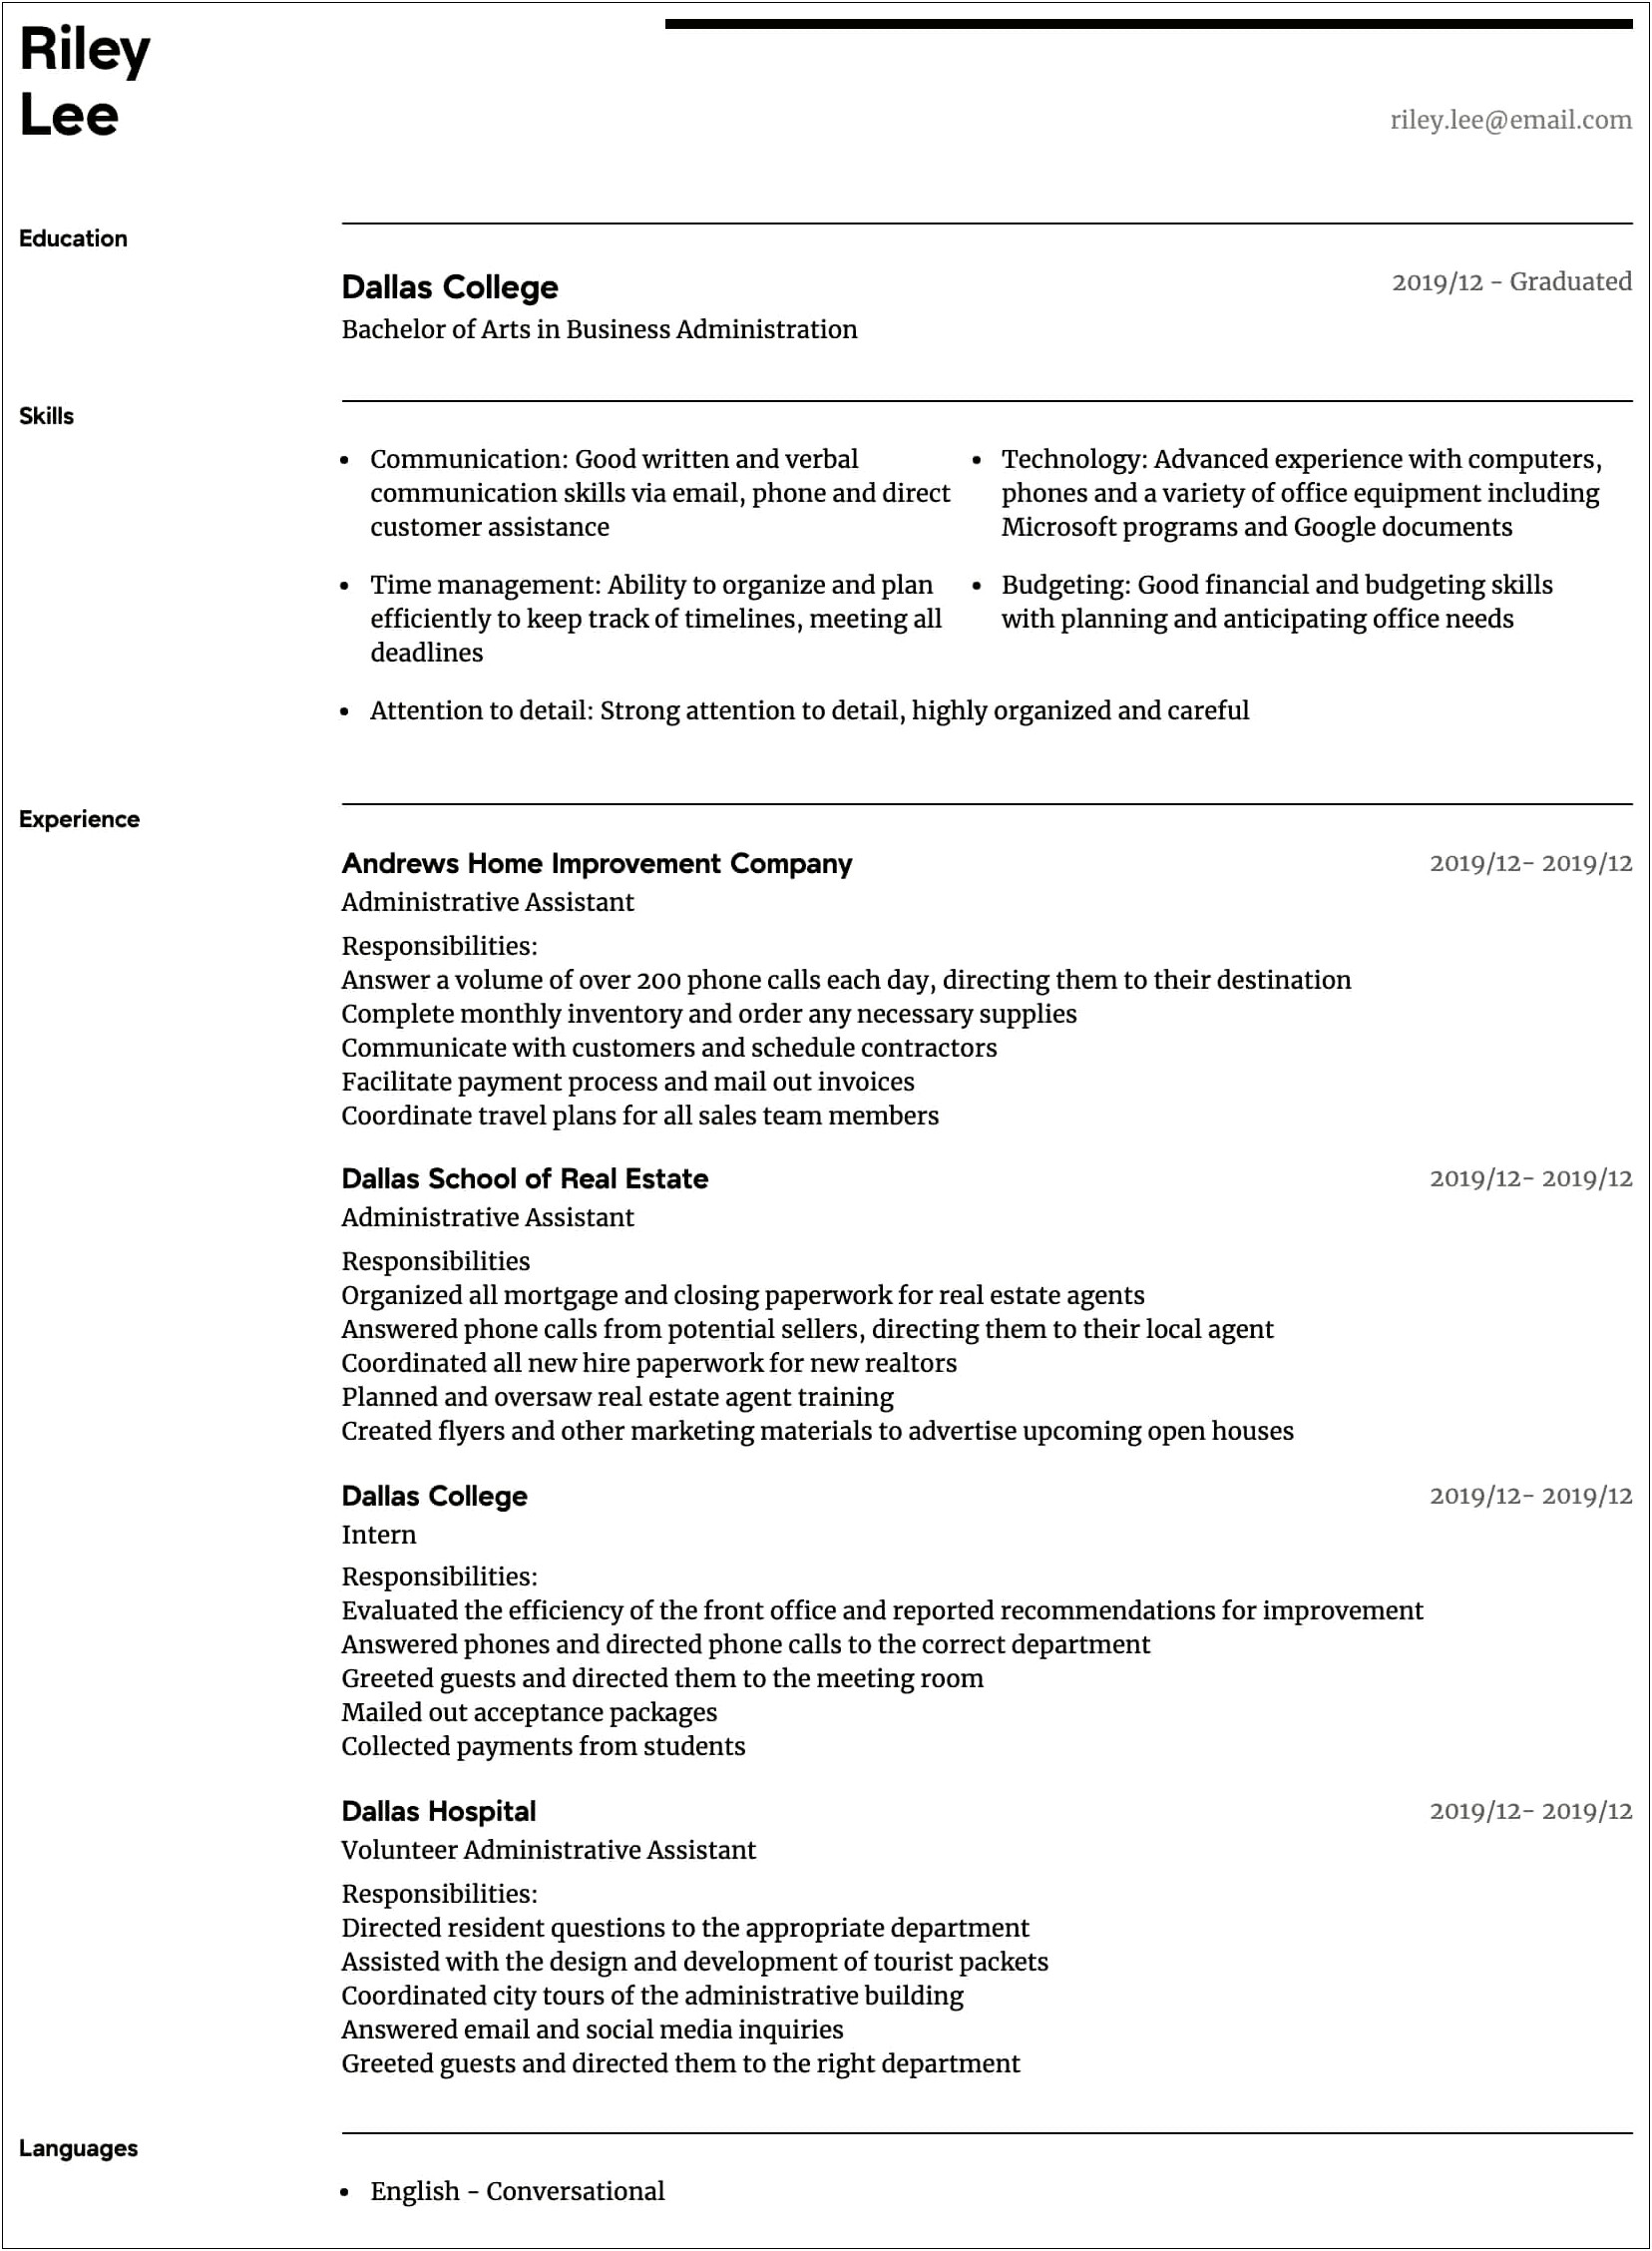 Resume Examples For Administrative Assistants 2018